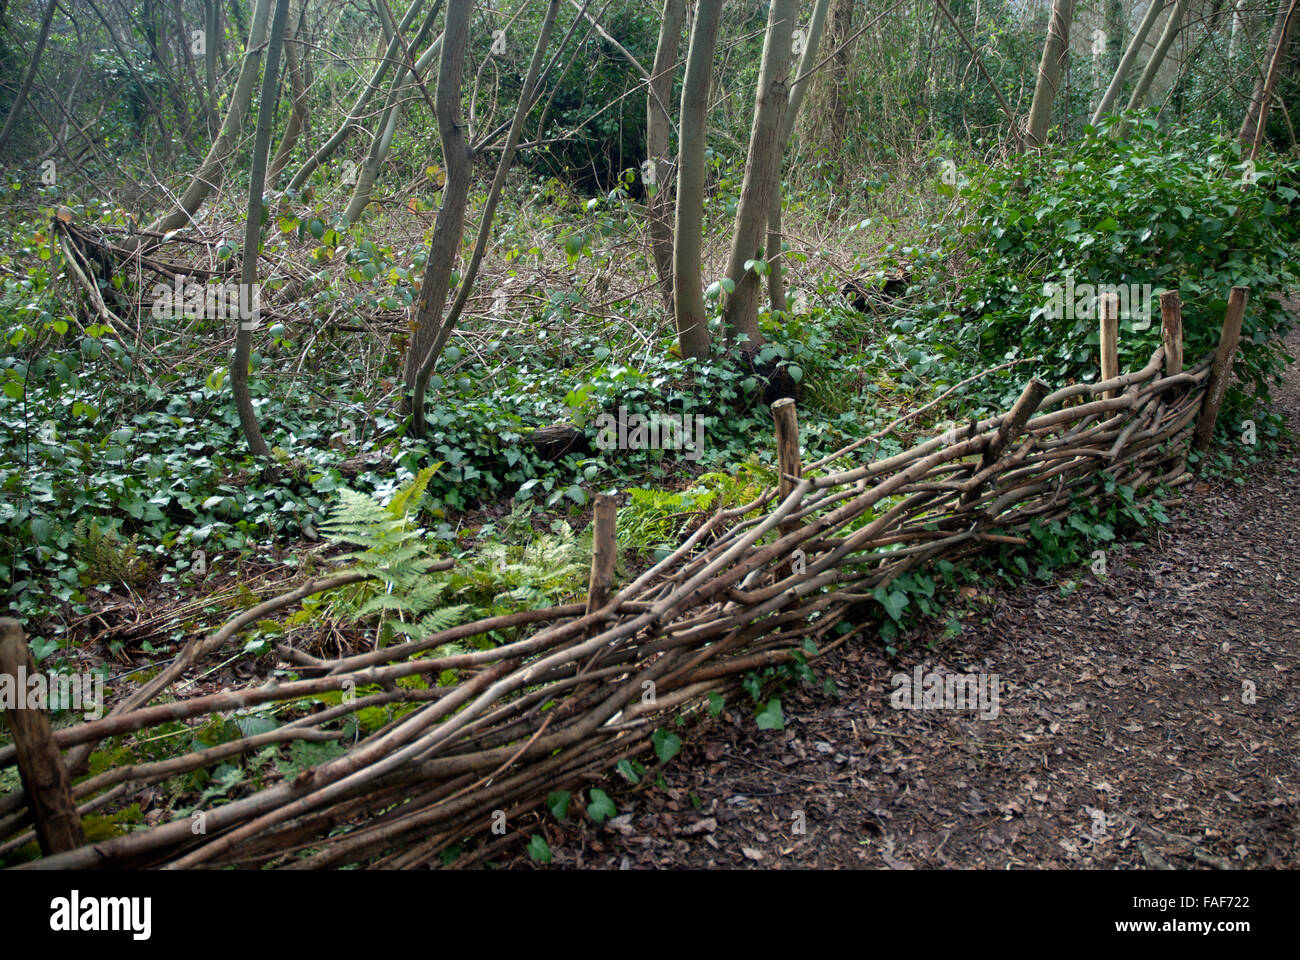 Fence made of twigs and branches Gunnersbury Triangle Nature Reserve, Chiswick West London, England UK Stock Photo